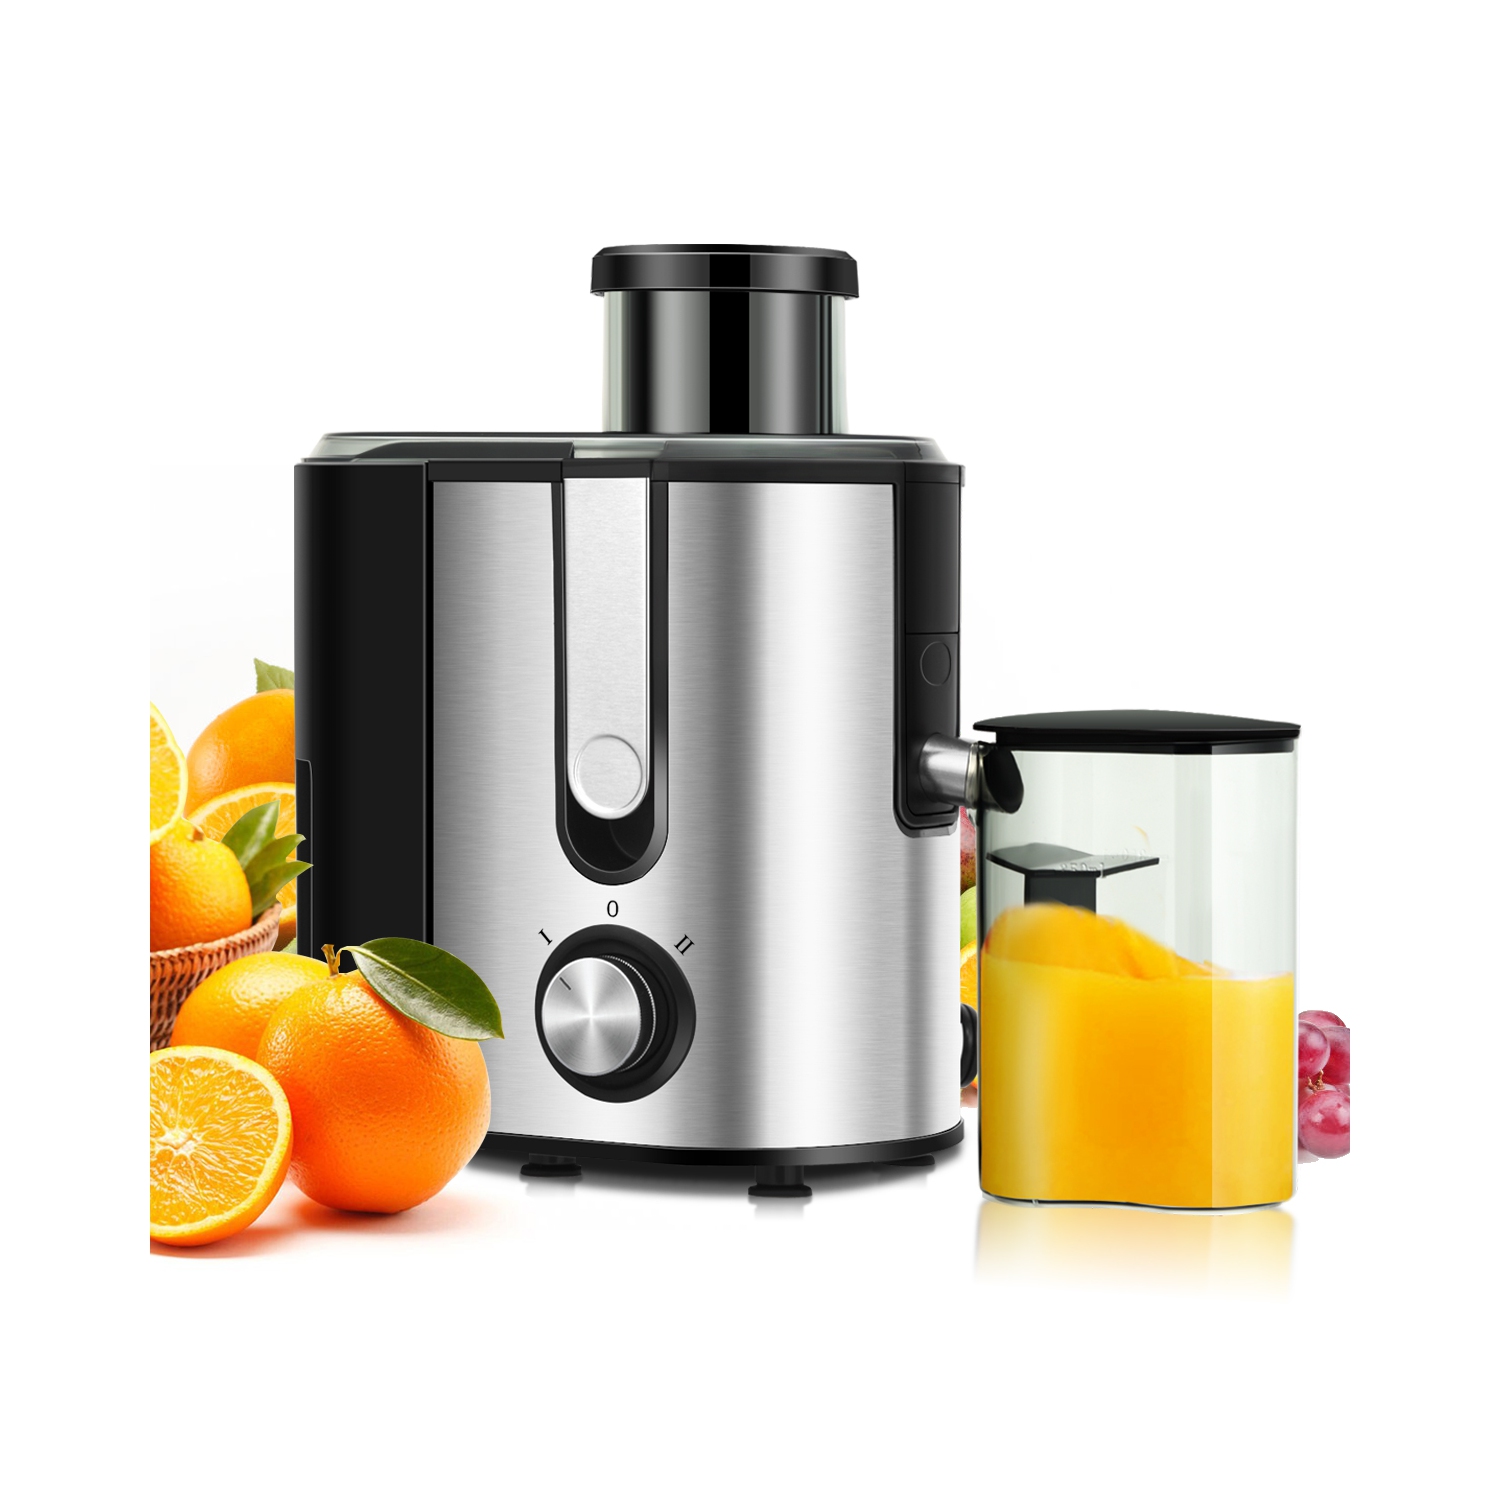 Costway Juicer Machine Juicer Extractor Dual Speed w/ 2.5'' Feed Chute